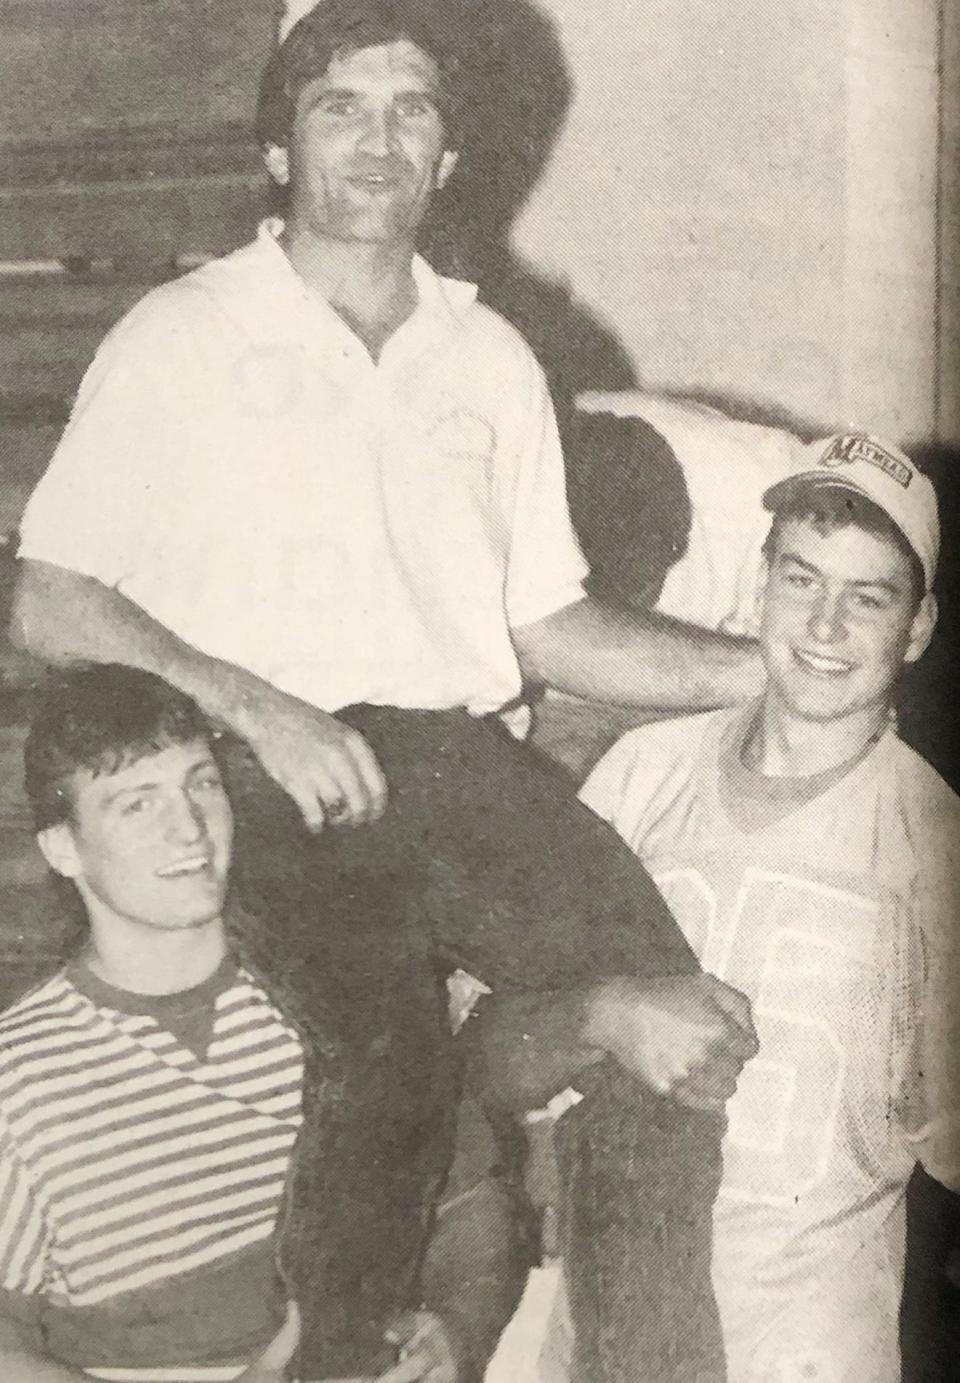 Hamlin head coach Arlin Likness is lifted by players Scott Sauder (left) and Ron Holliday during a welcome home celebration for Hamlin's state Class 11B state championship football team in 1989. It was the first state title for Hamlin, which repeated in 1990 and 1991.